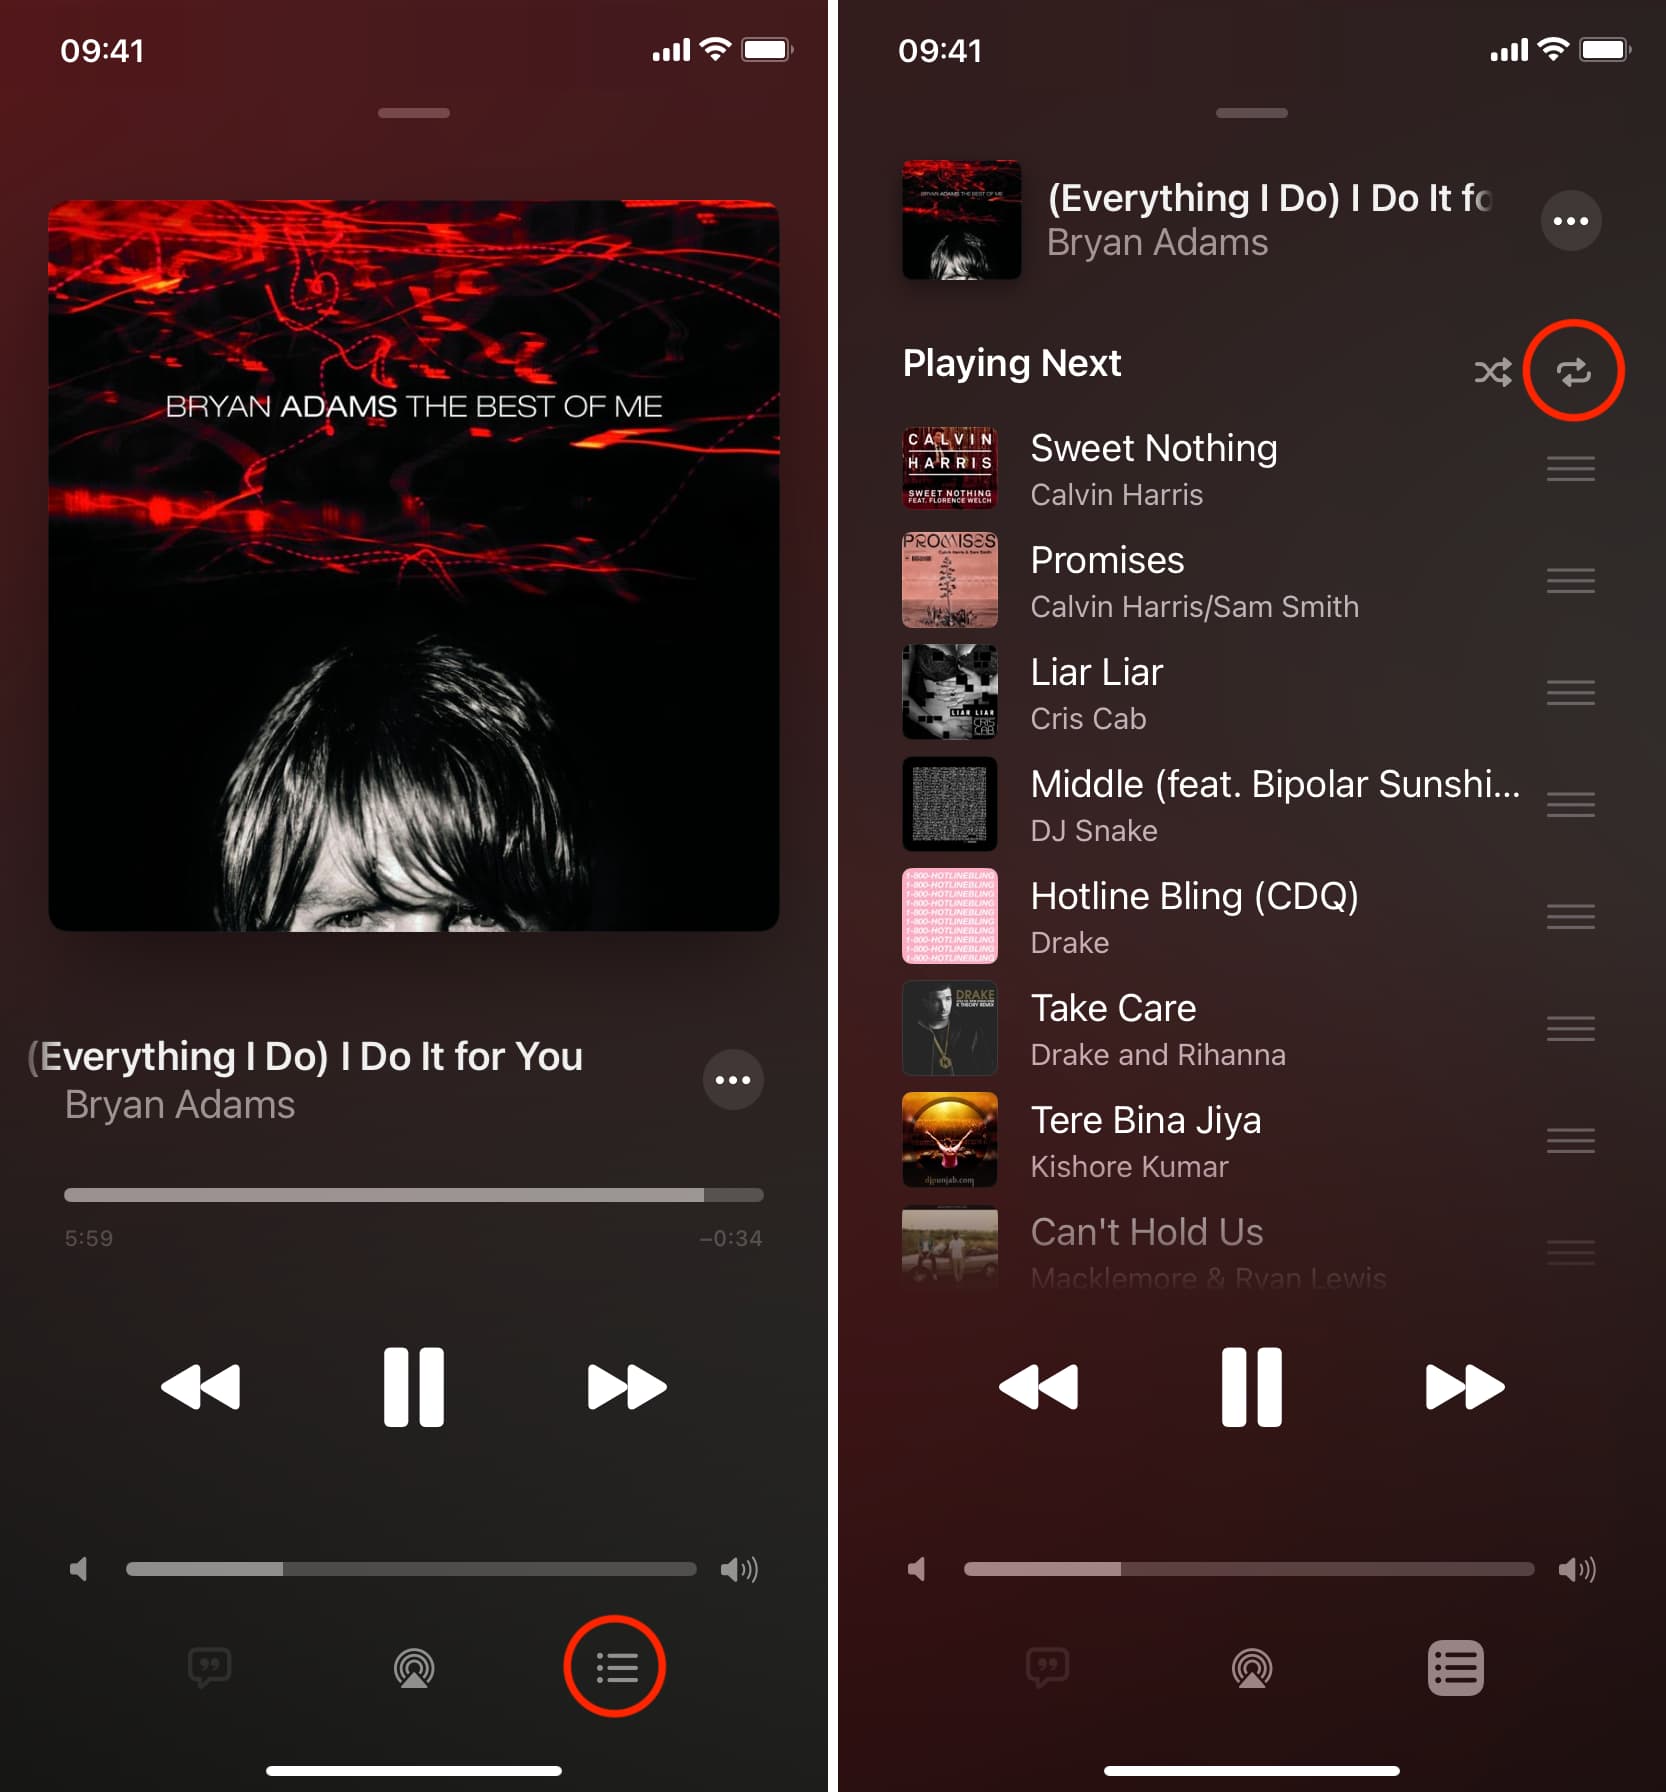 music-repeat-setting-songs-on-repeat-in-iphone-10